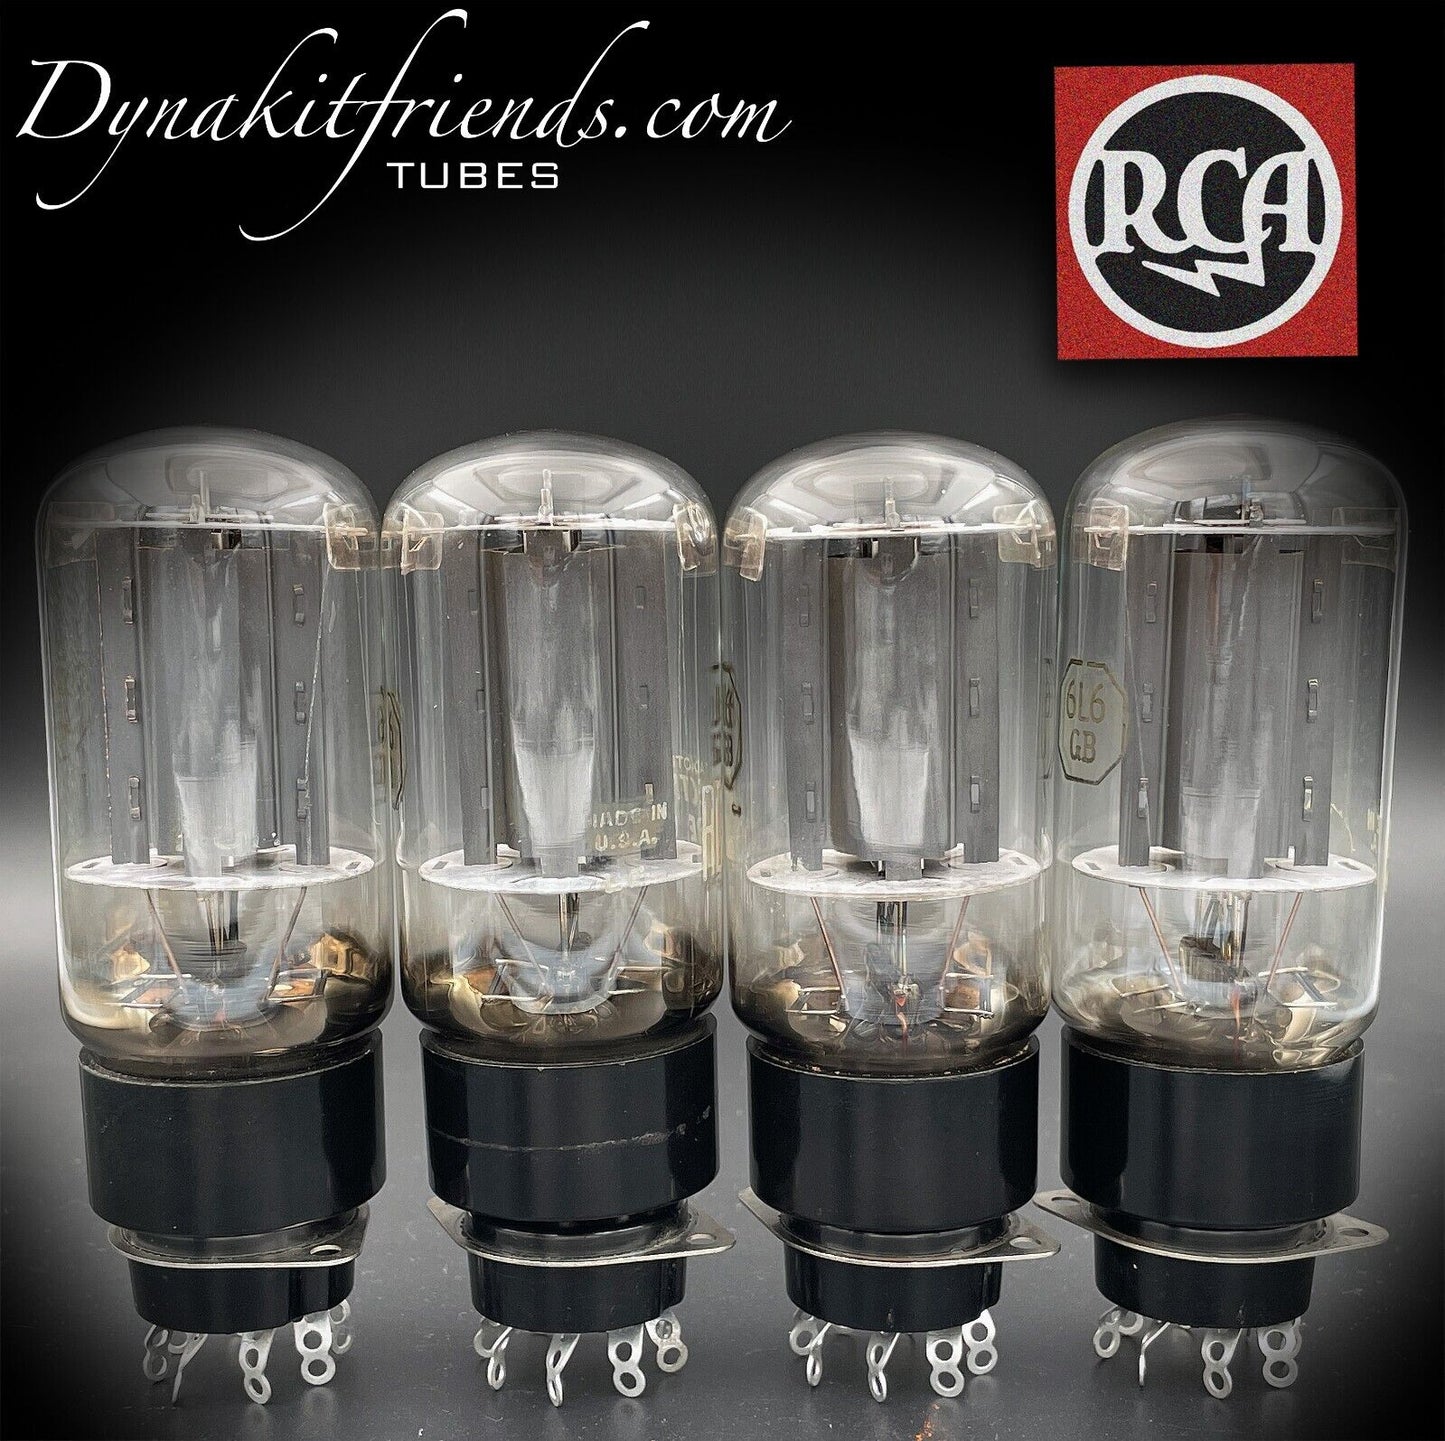 6L6GB RCA Gray Plates Bottom DD Getter Matched Tubes MADE IN USA